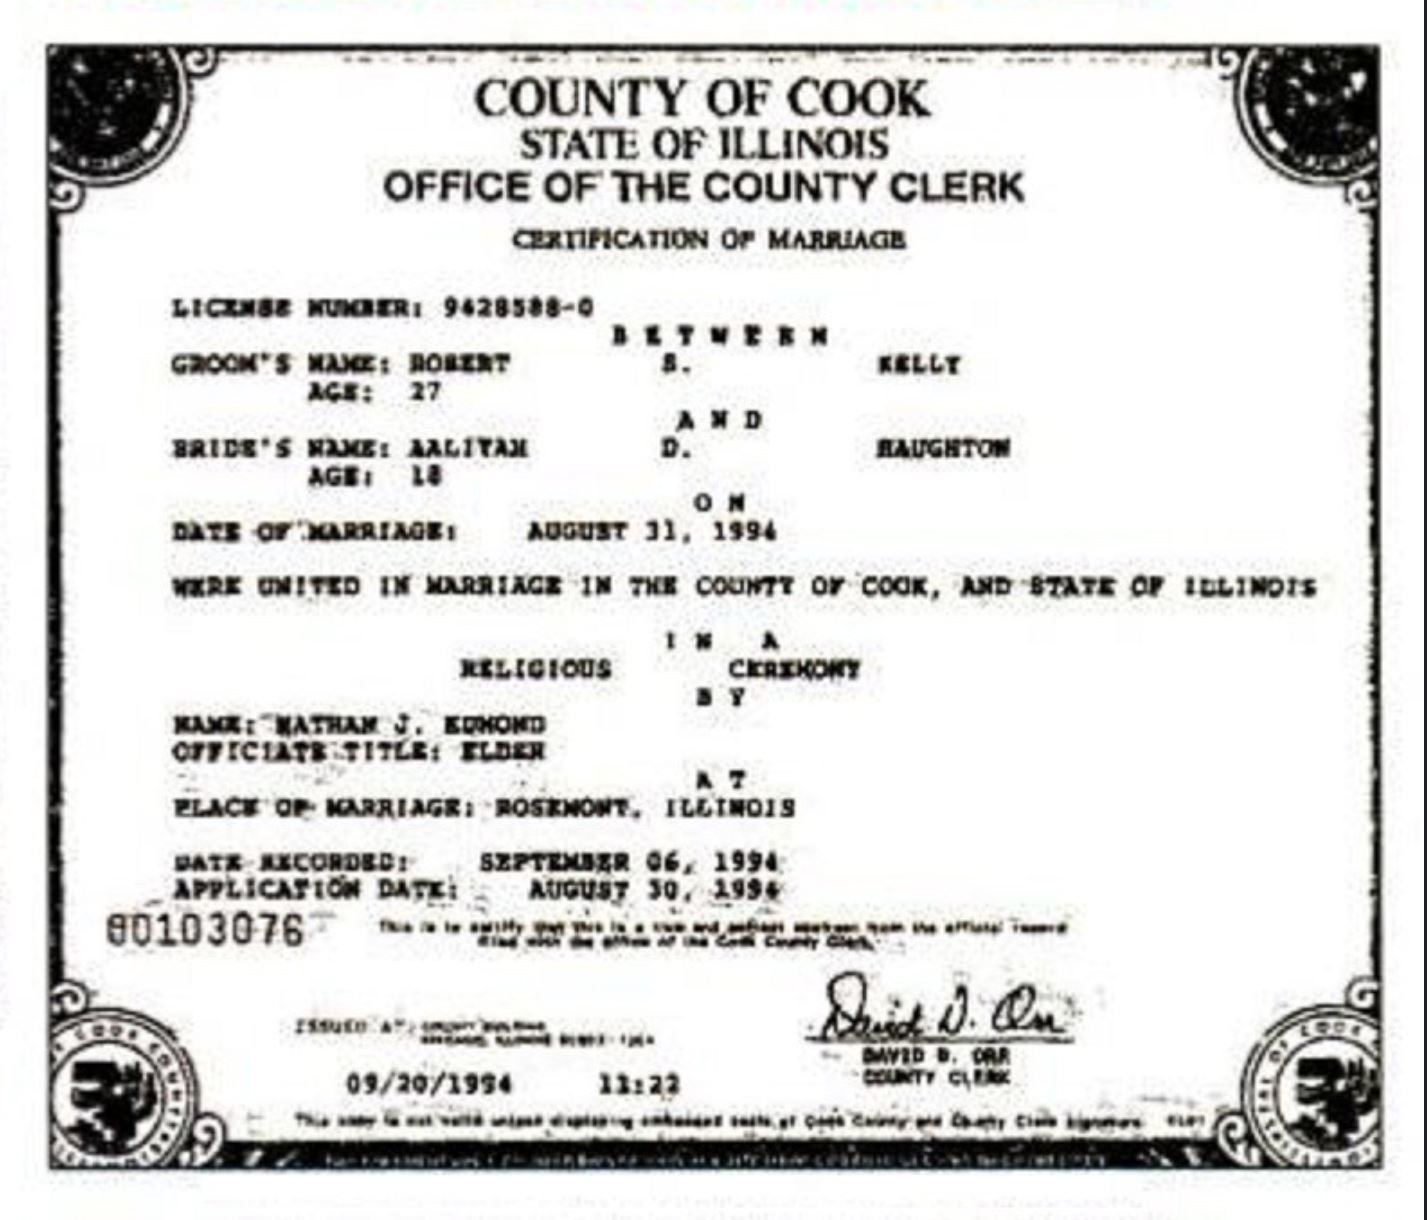 Marriage certificate of Kelly and Aaliyah